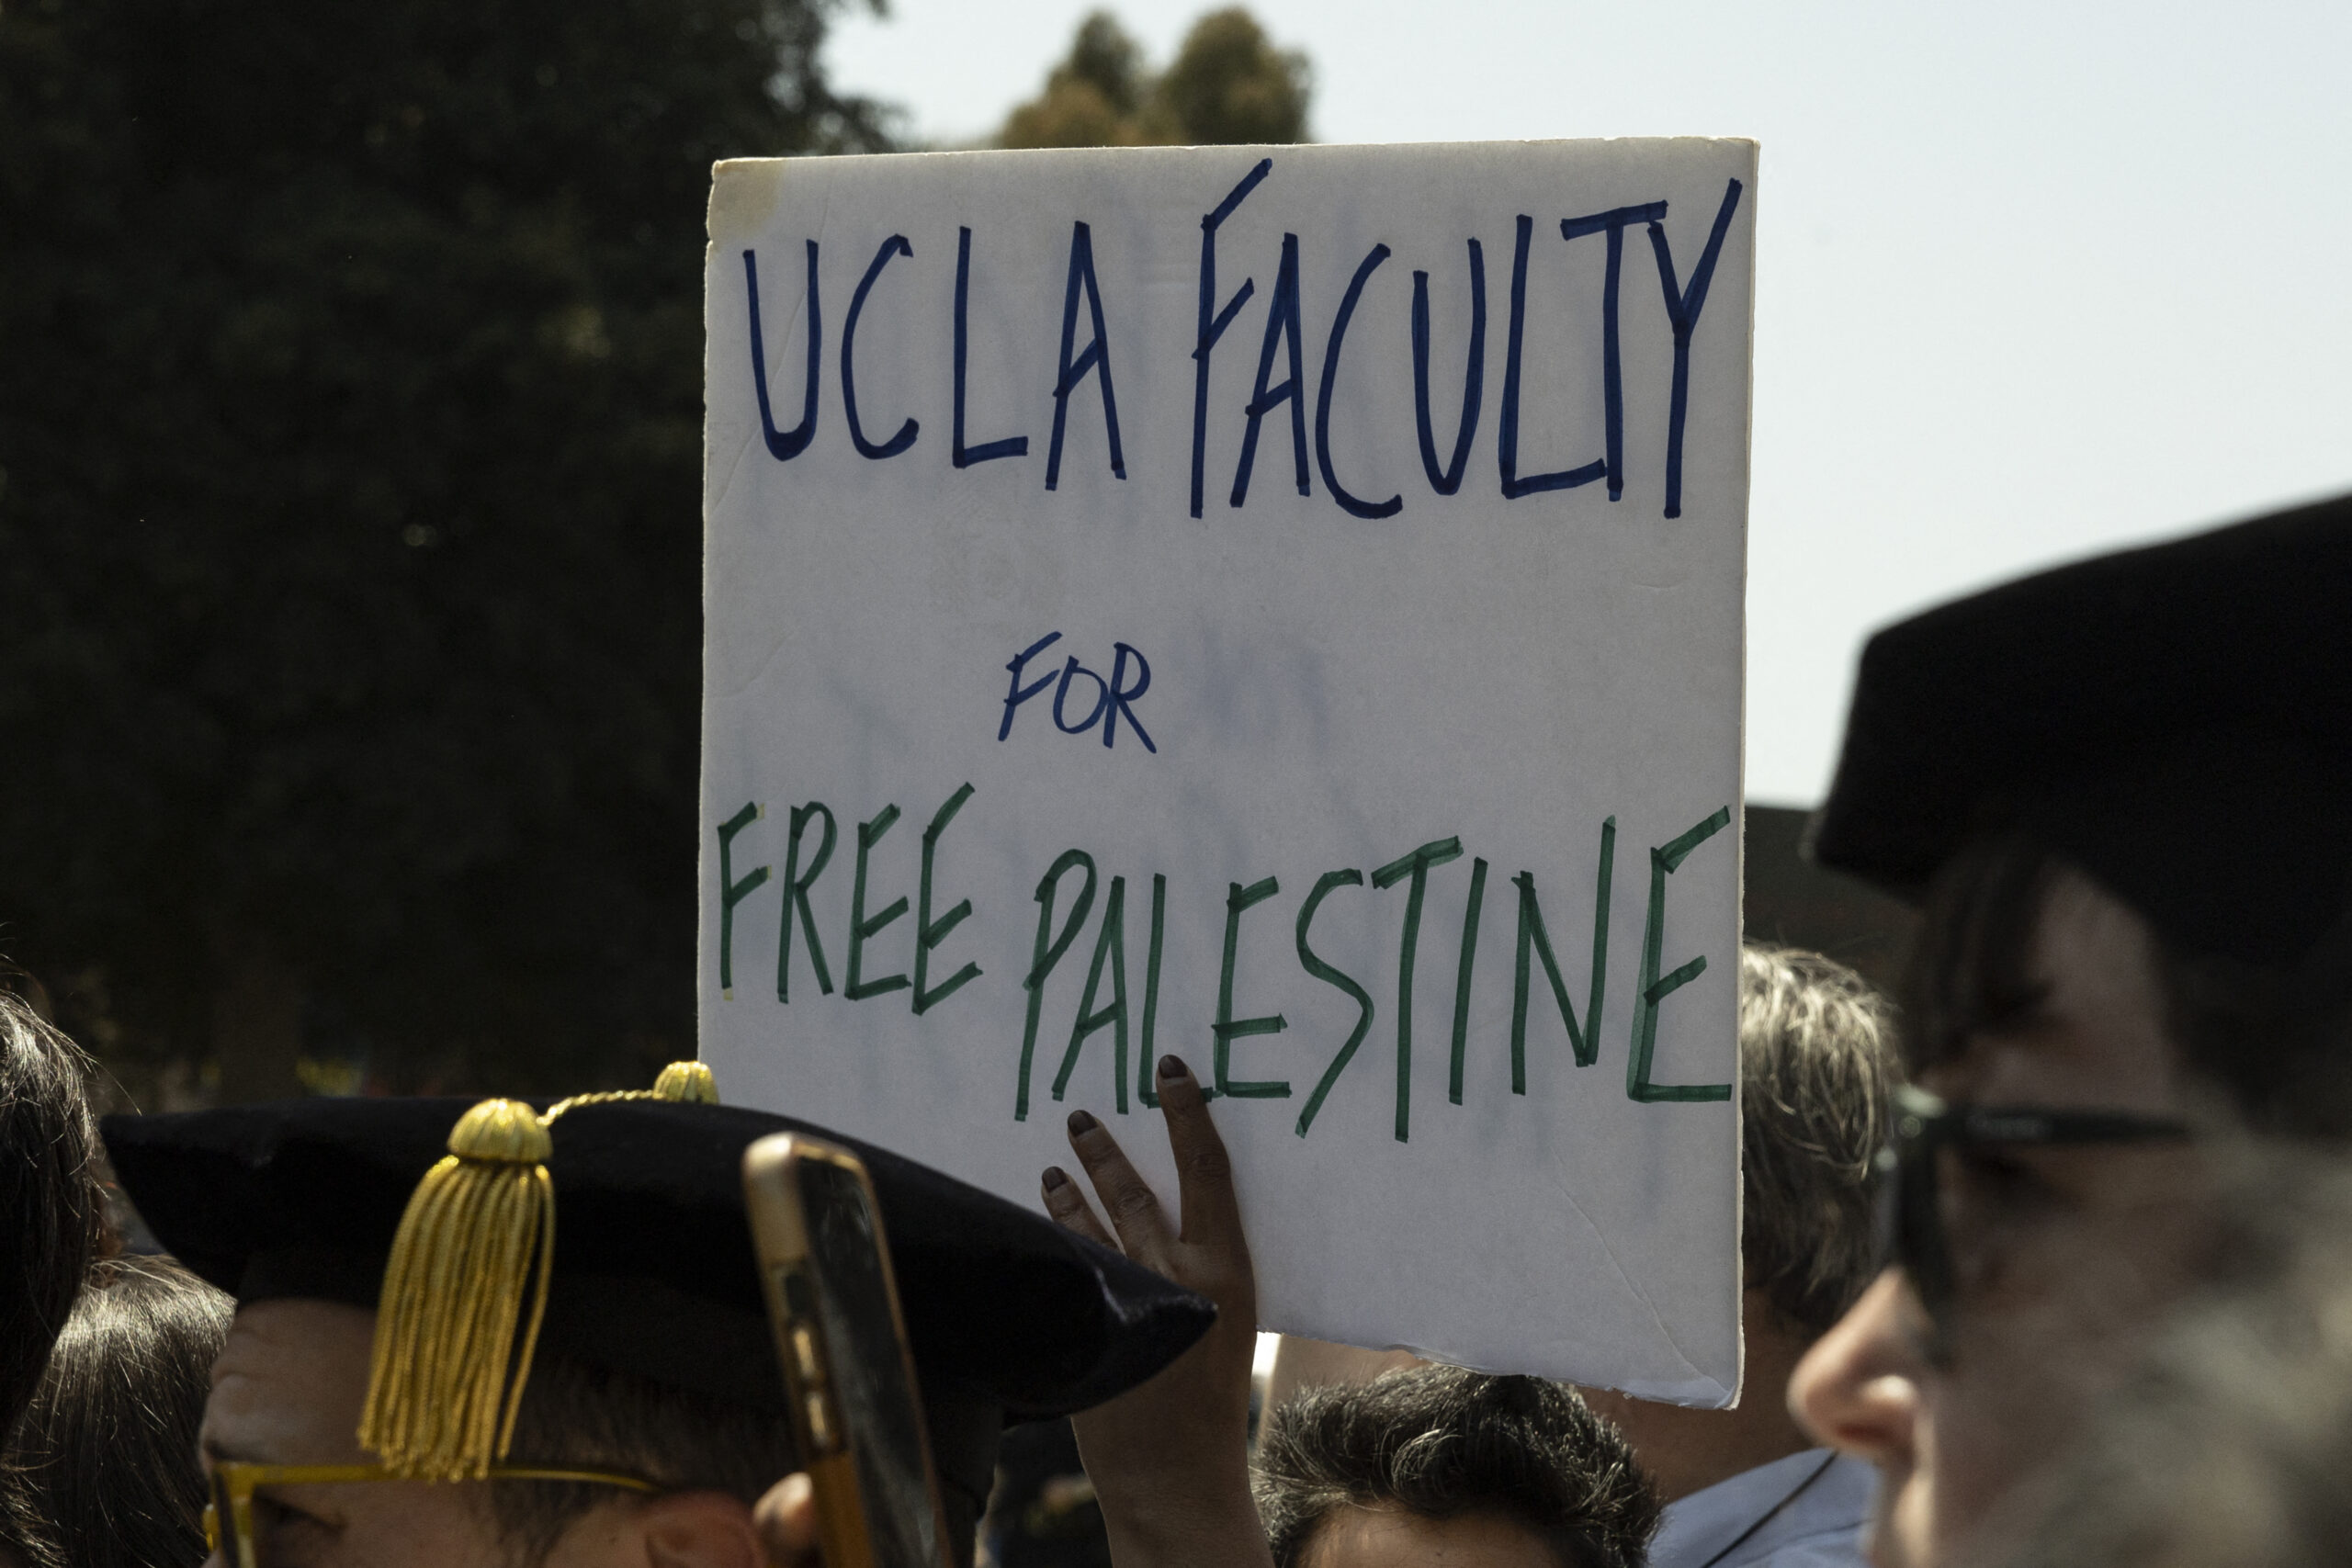 Unrest at UCLA: What we know